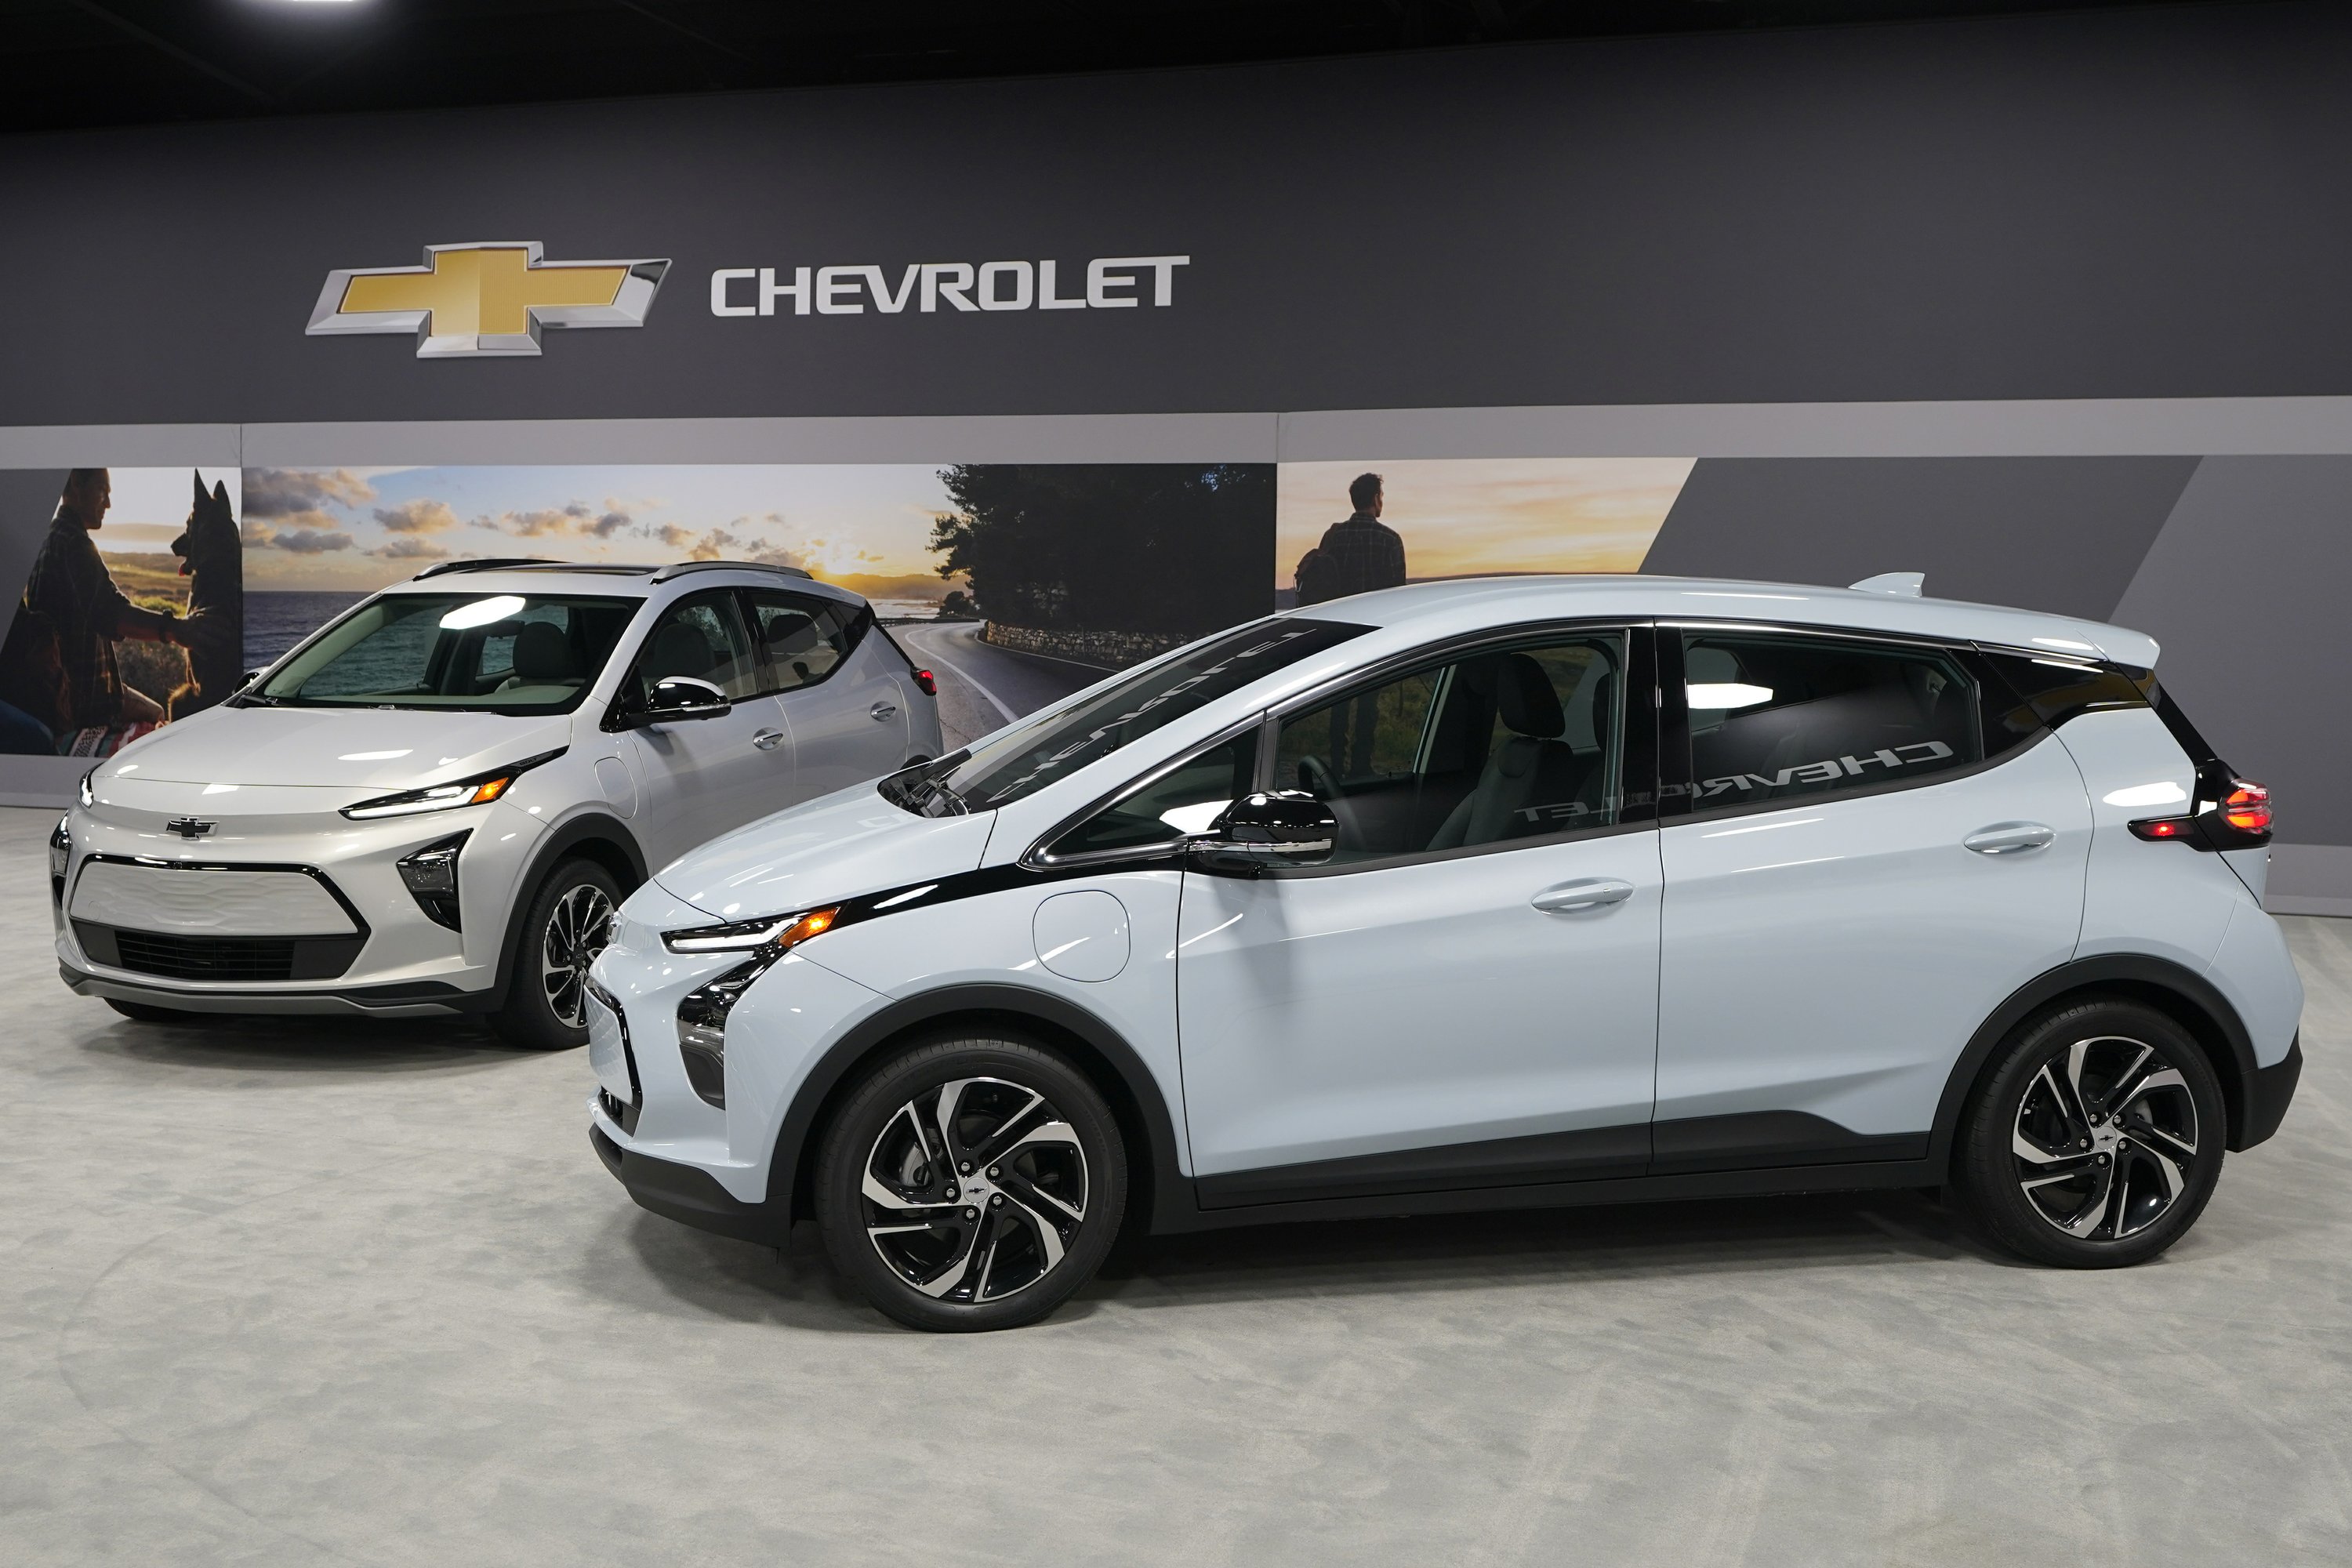 GM’s Chevy Bolt SUV joins parade of new US electric vehicles